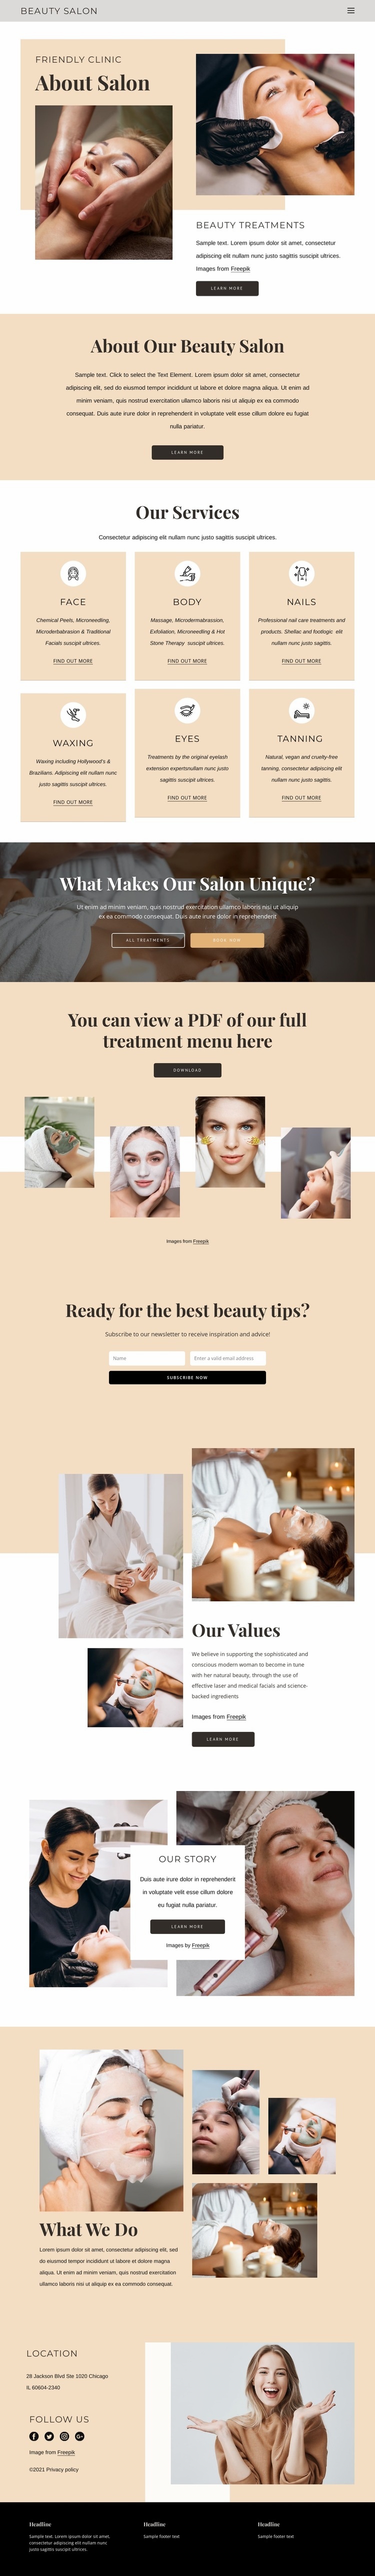 Beauty and aesthetic treatments Homepage Design